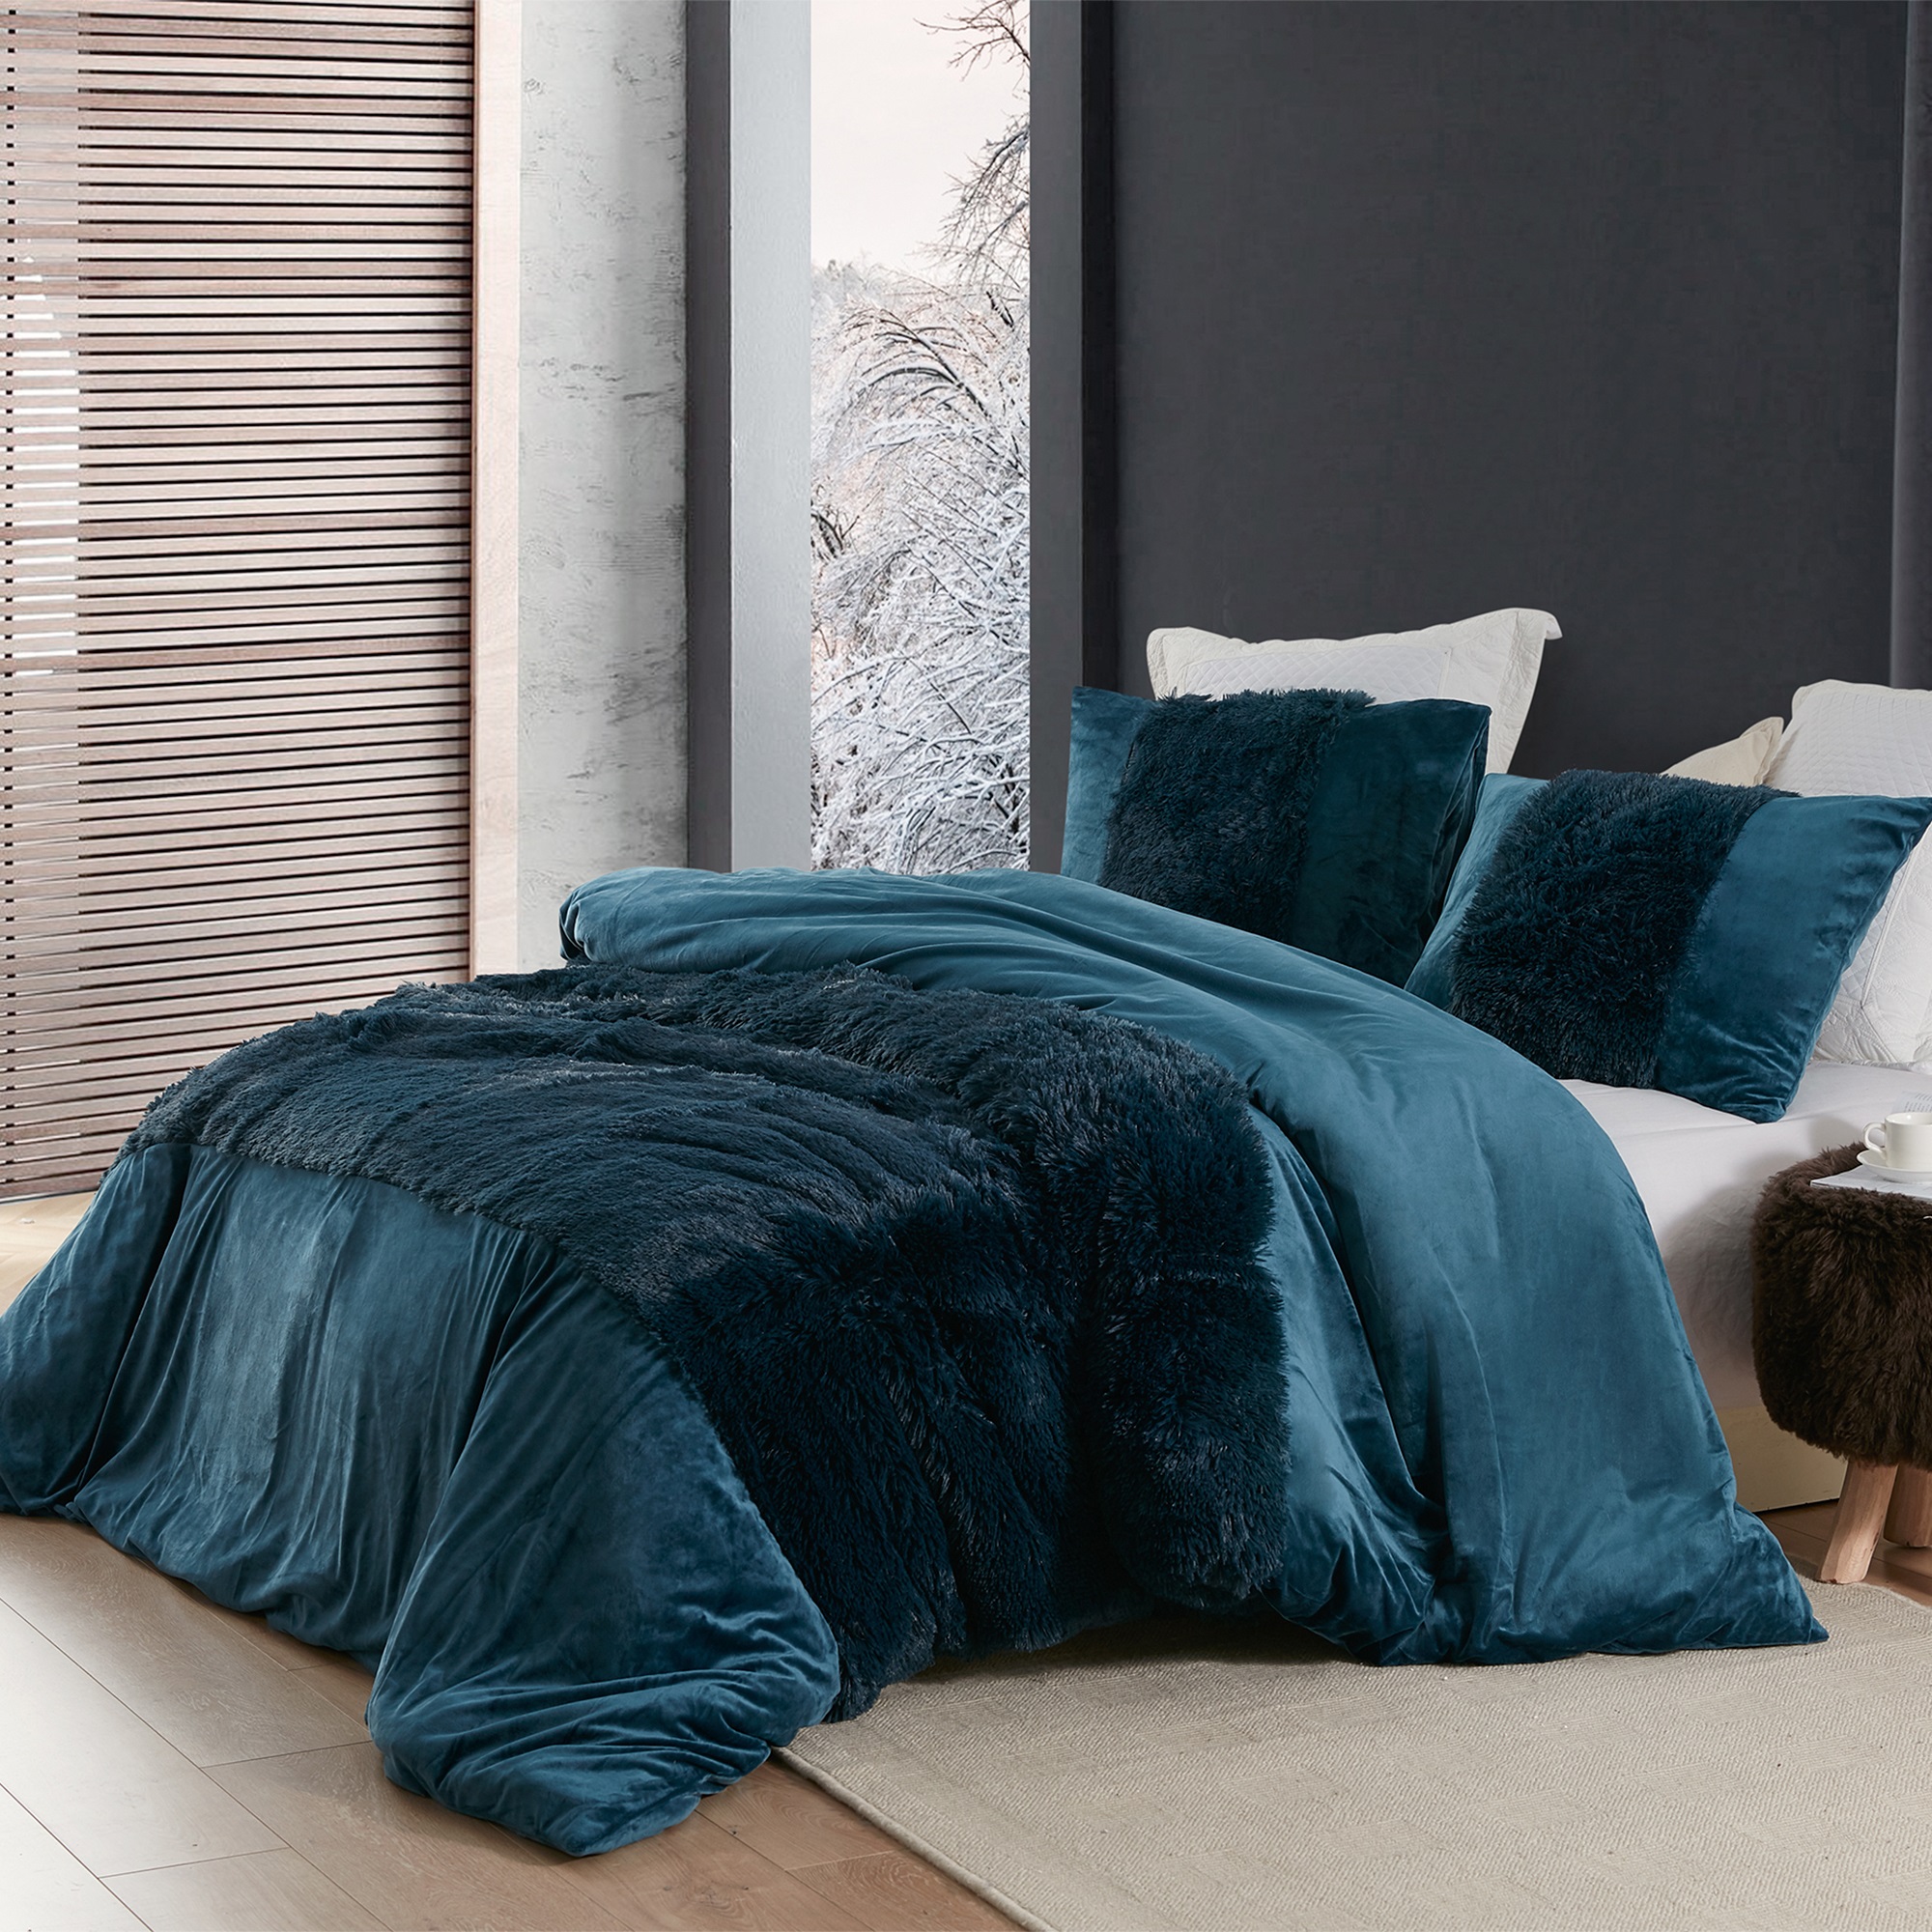 Coma Inducer?? Duvet Cover - Are You Kidding? - Nightfall Navy